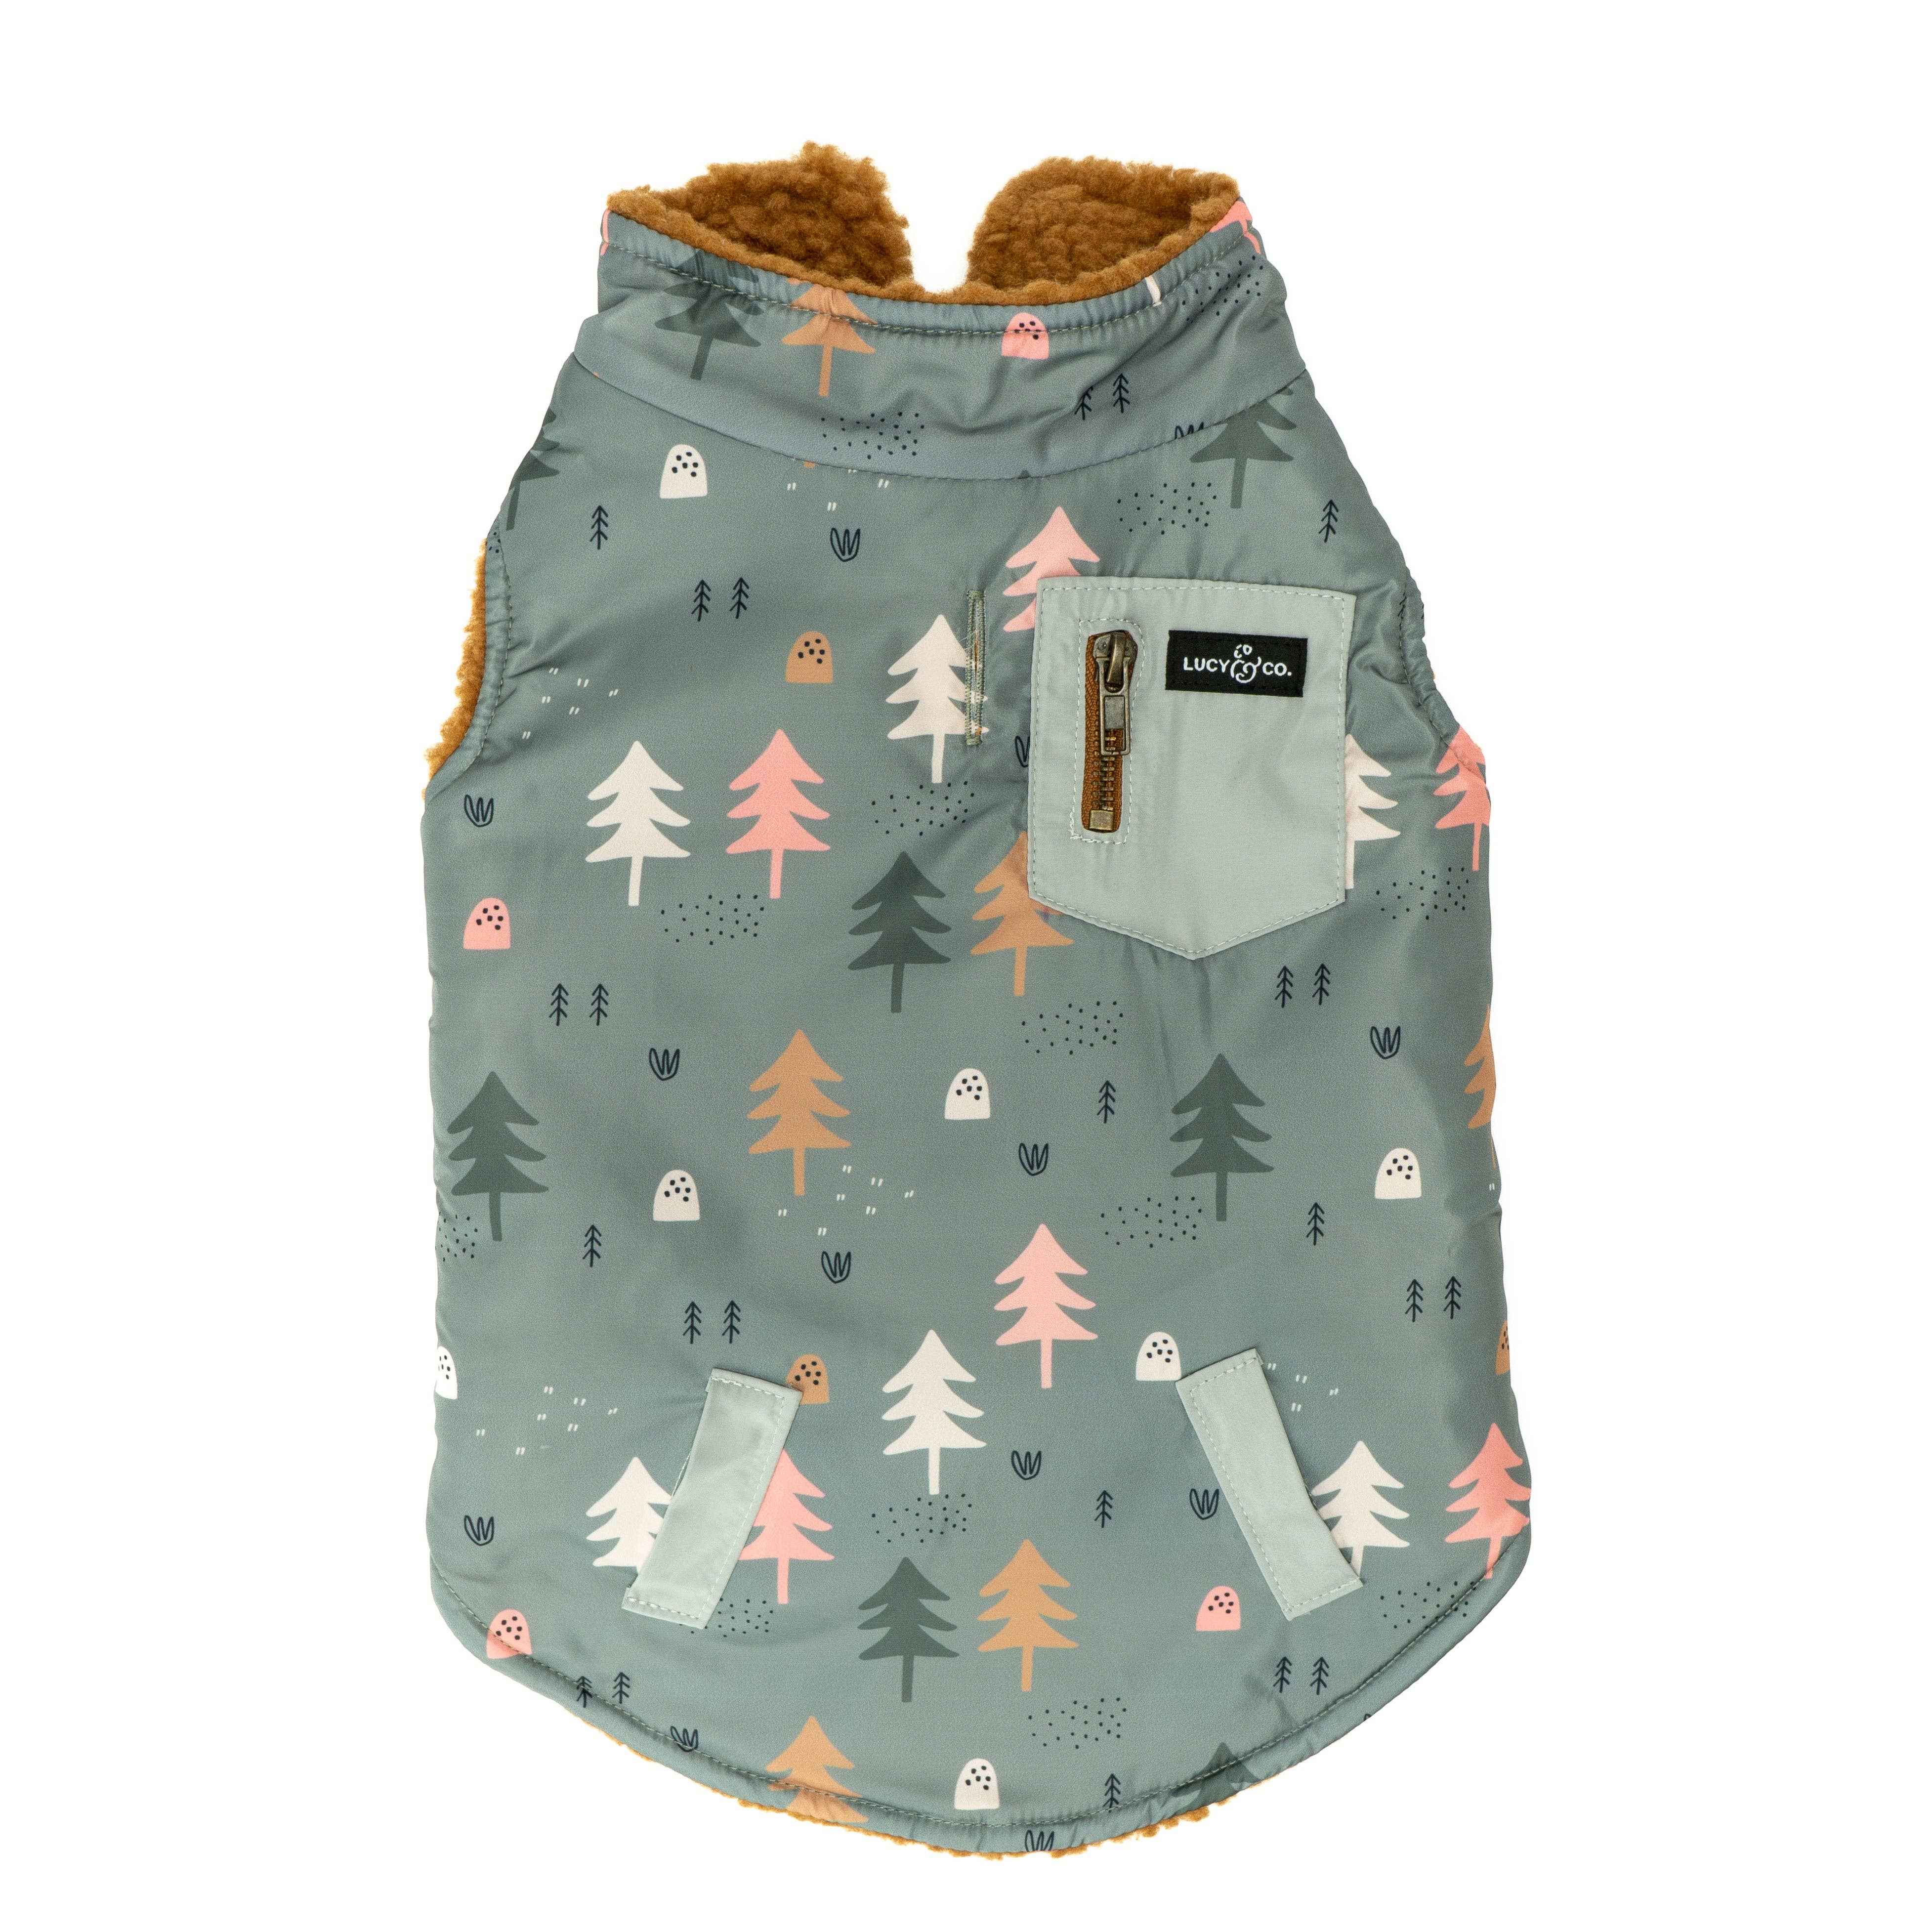 The Take a Hike Reversible Teddy Vest: 2XL